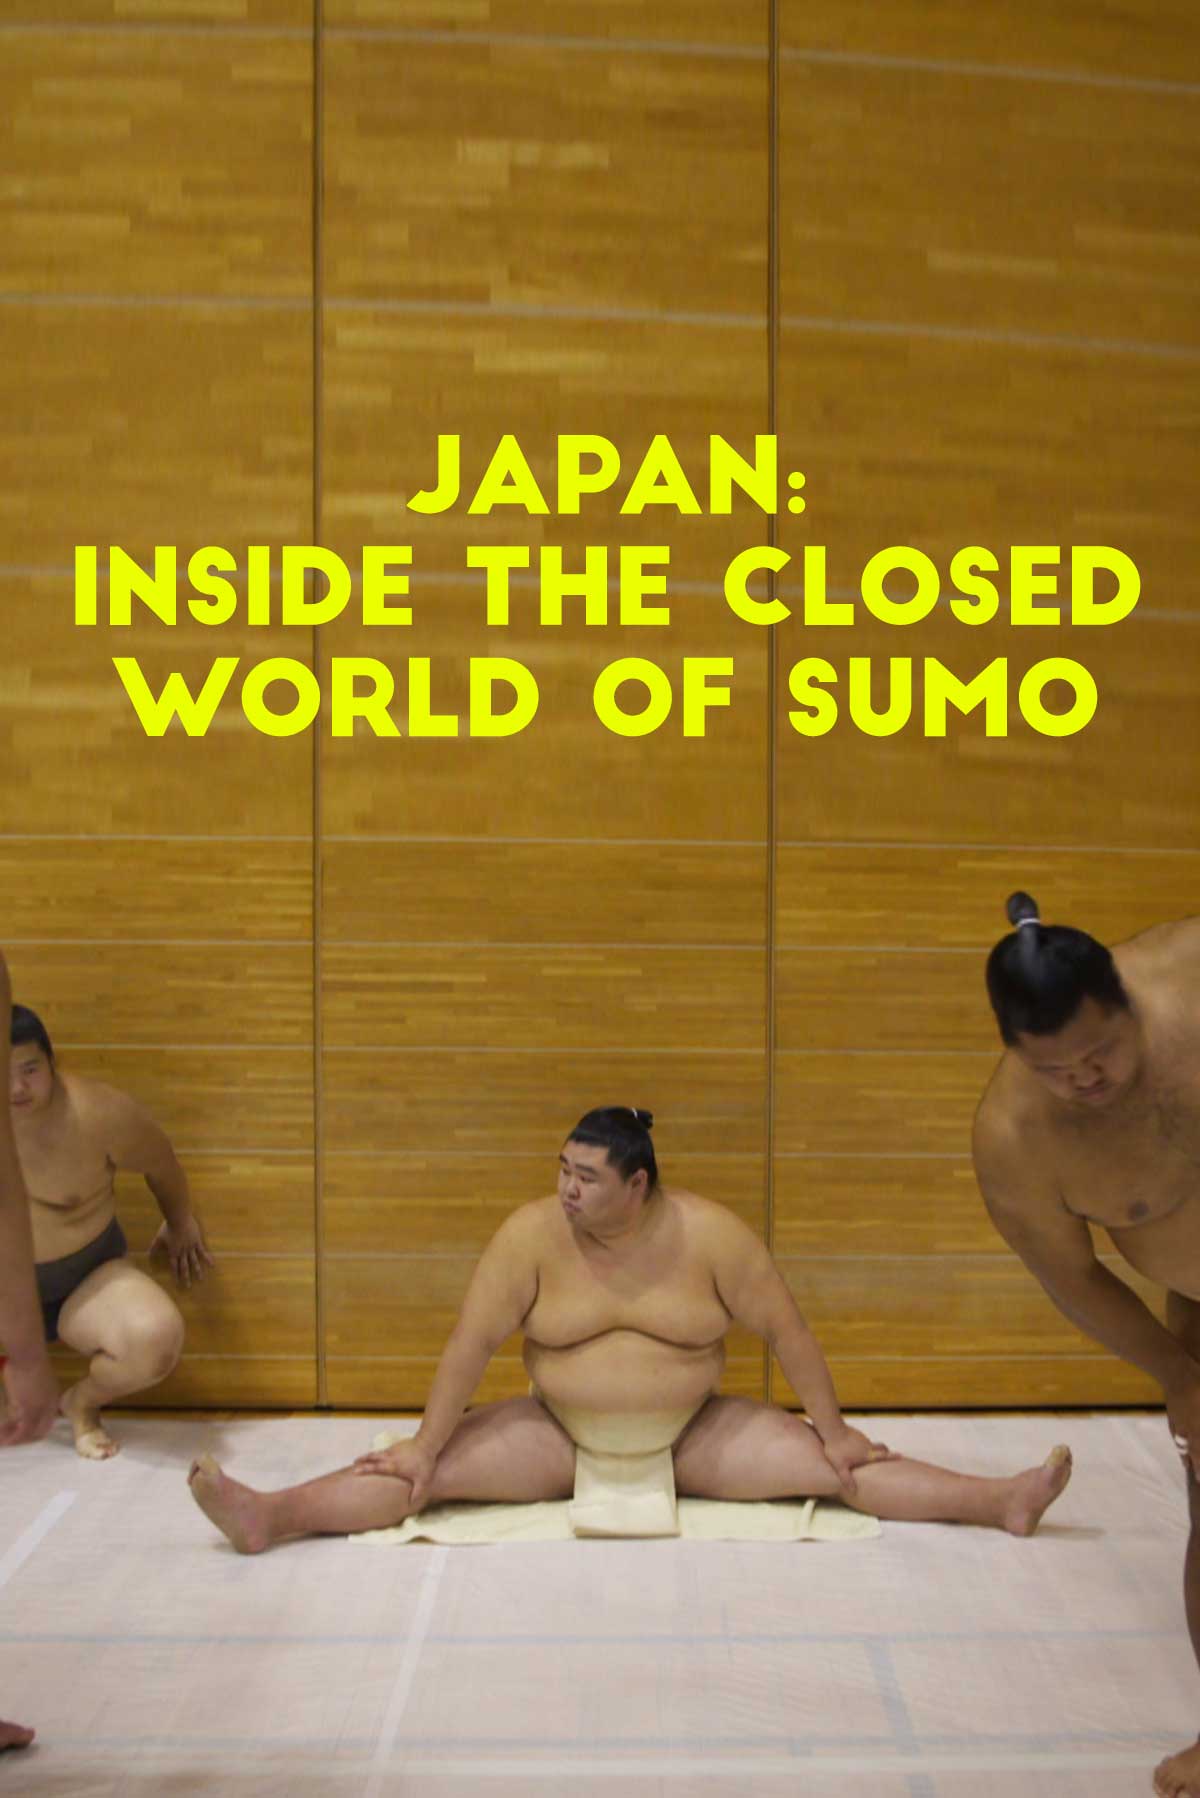 Japan: Inside The Closed World of Sumo